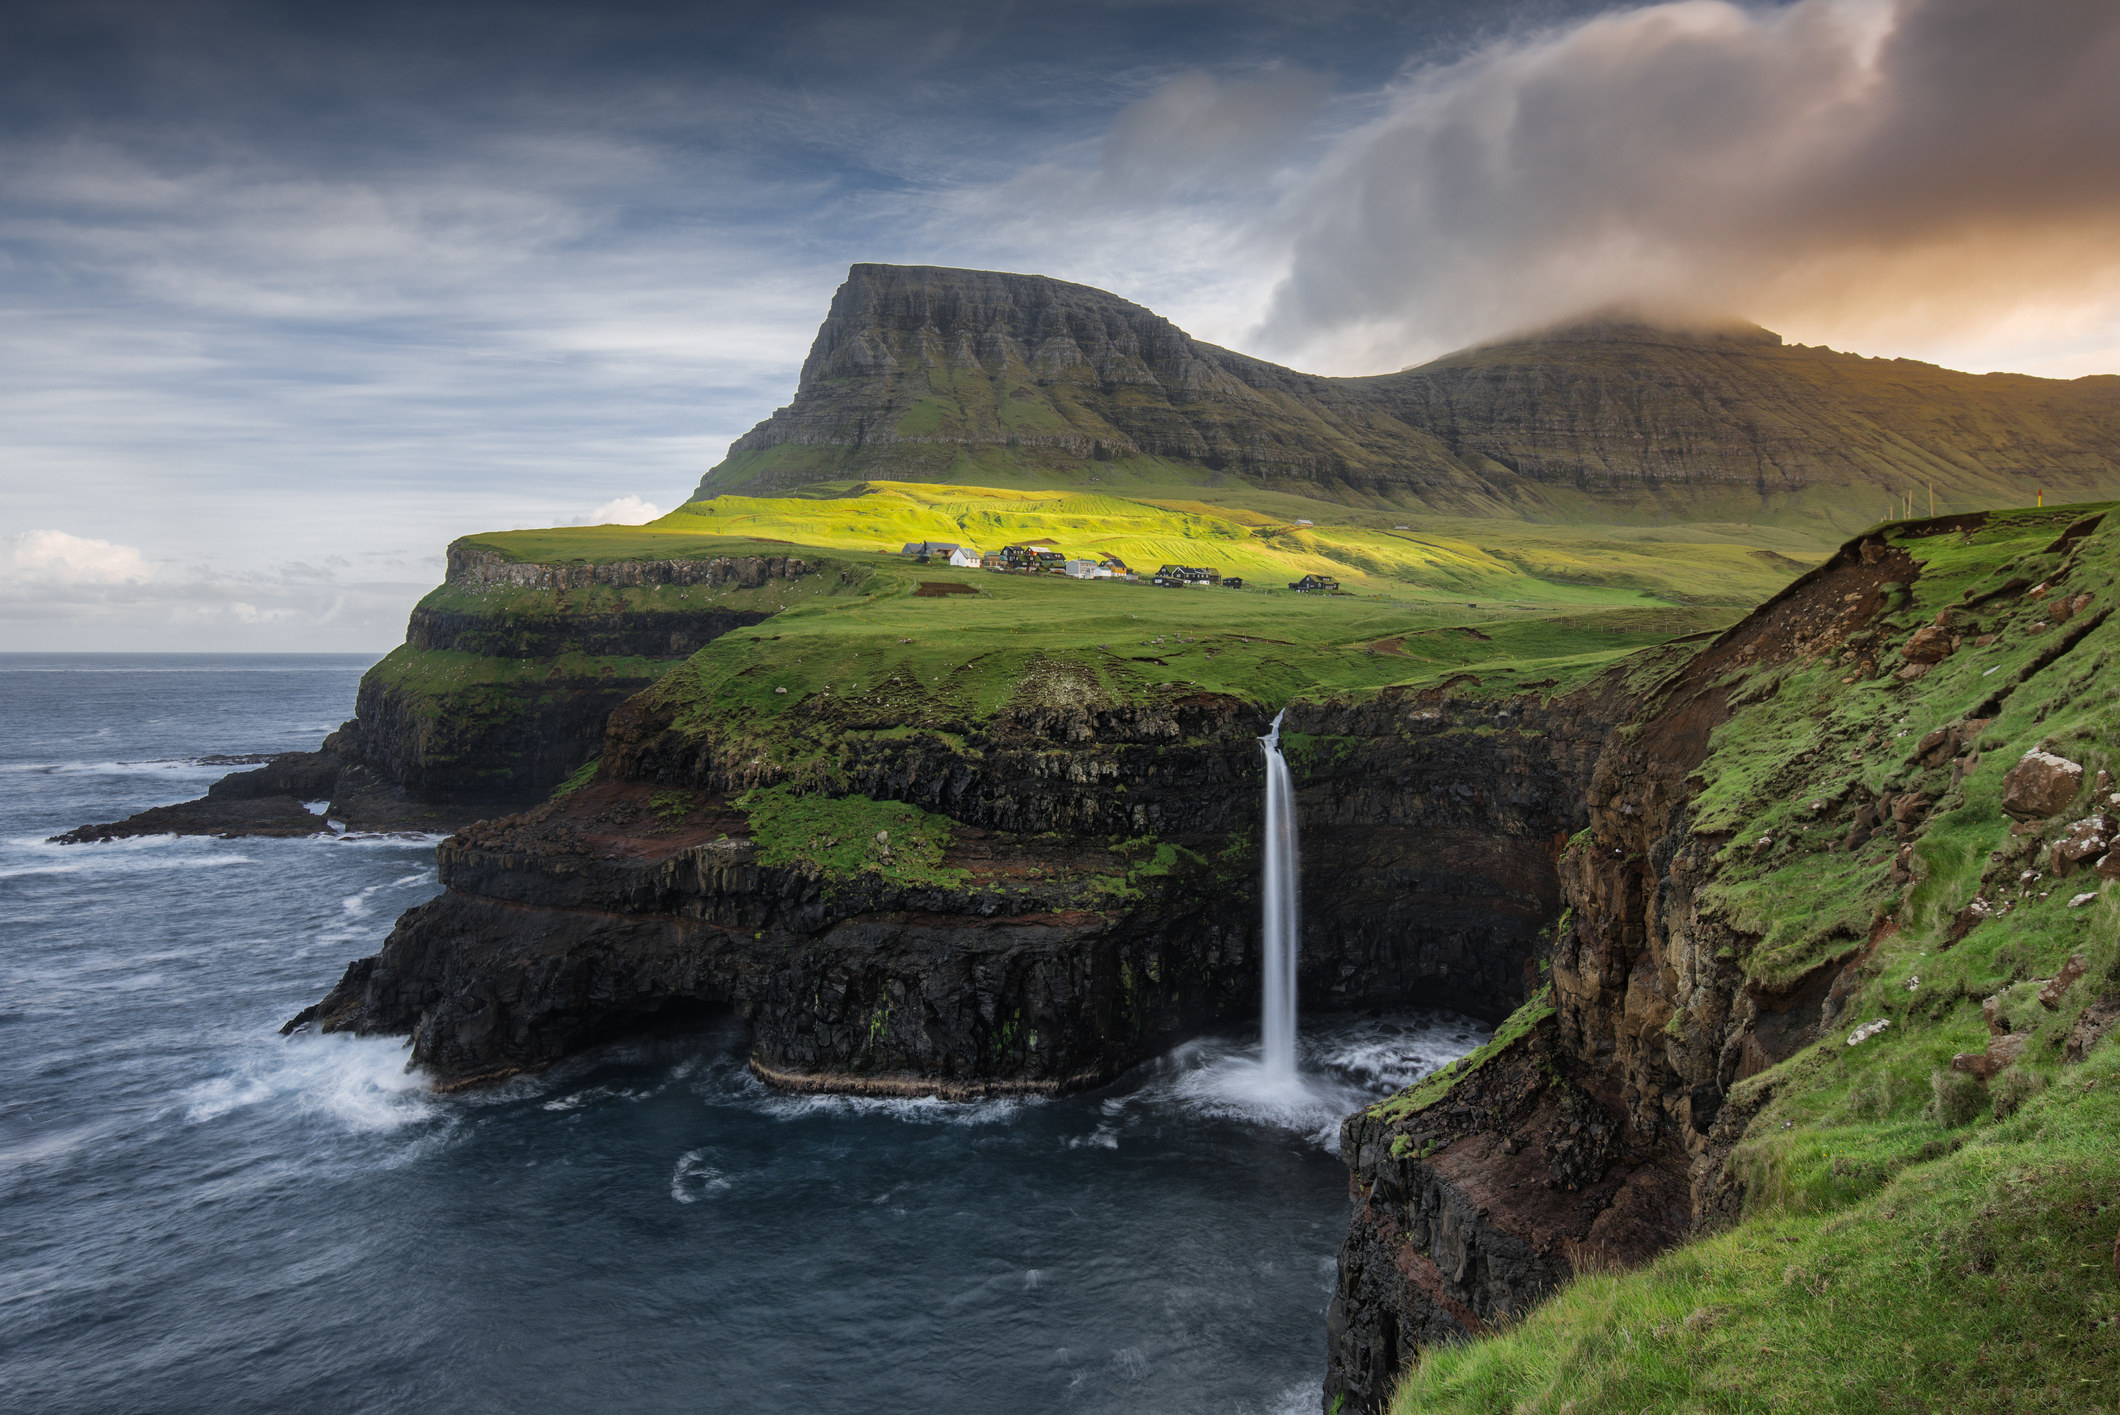 Dramatic black cliffs topped with green grass, with a waterfall dropping into a dark dea